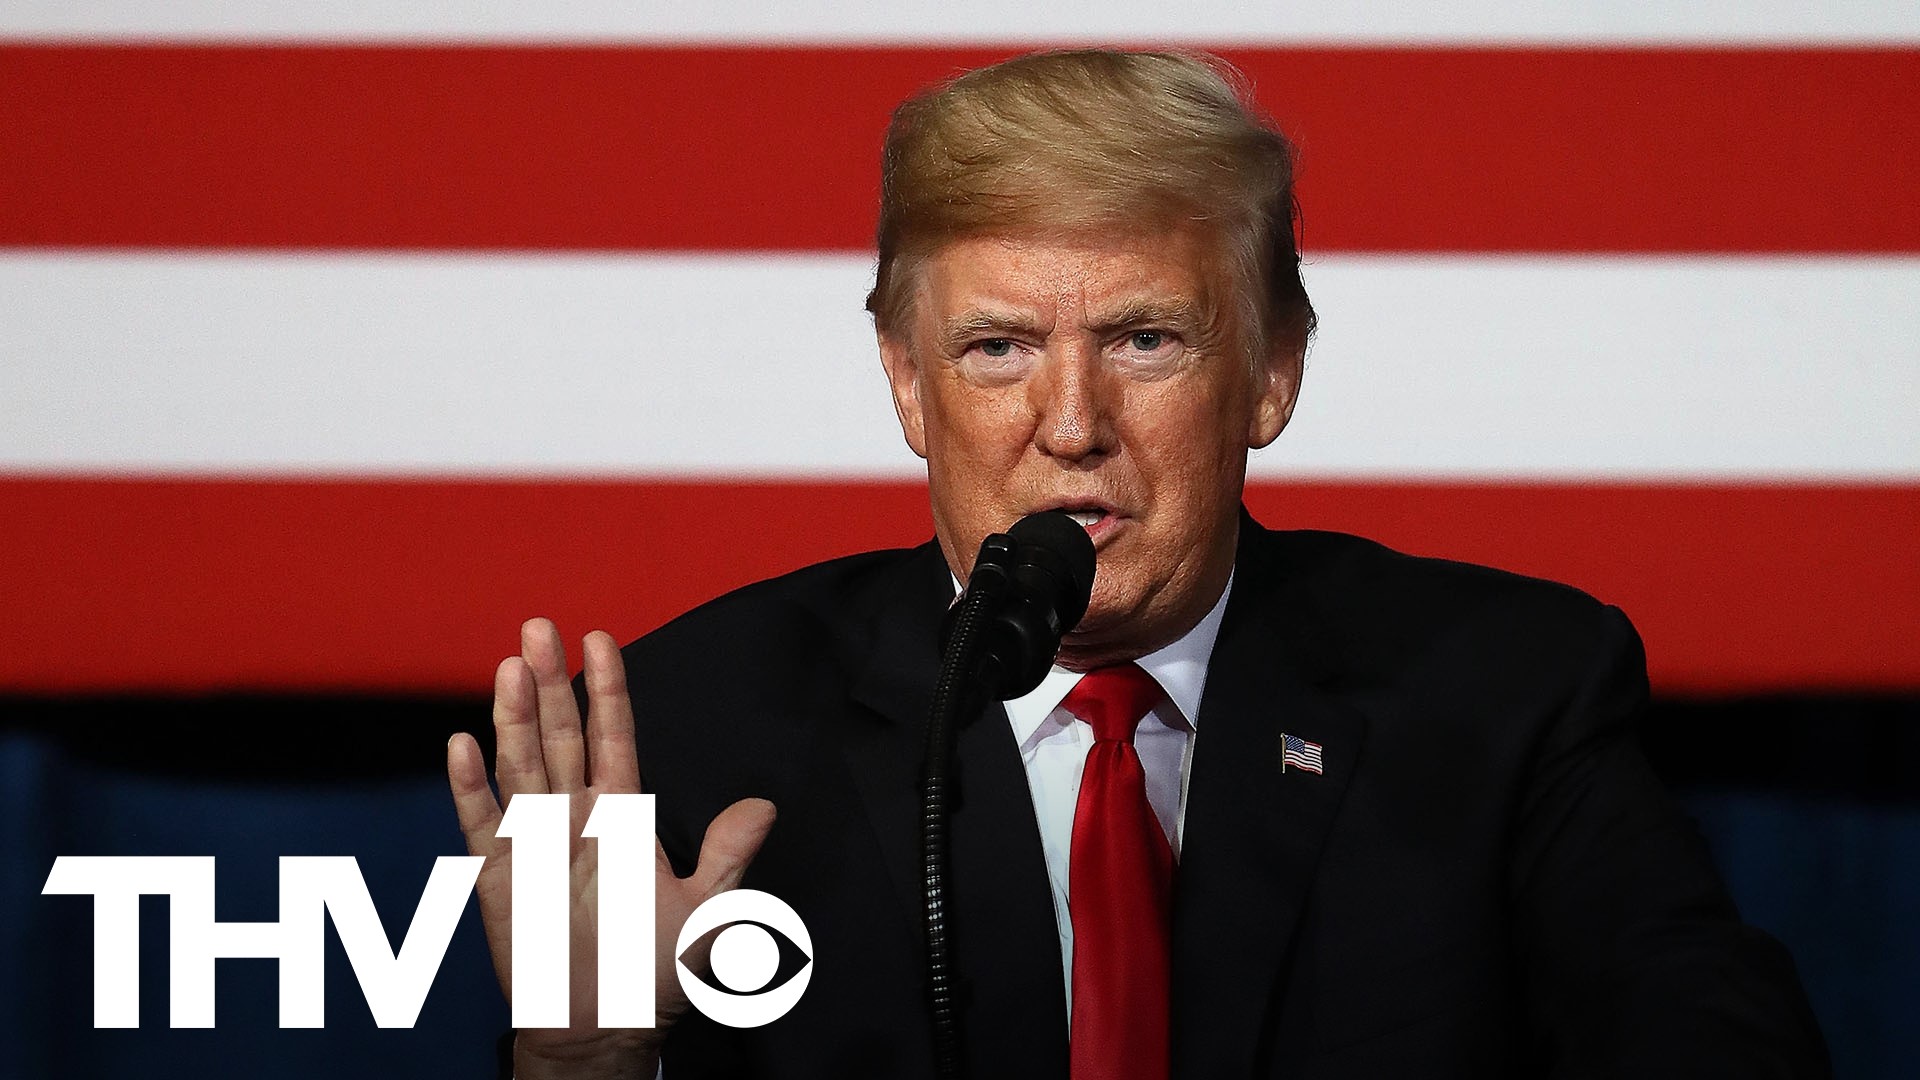 The 2024 race for the White House has now begun, and former President Donald Trump announced his third run for the White House on Tuesday evening.